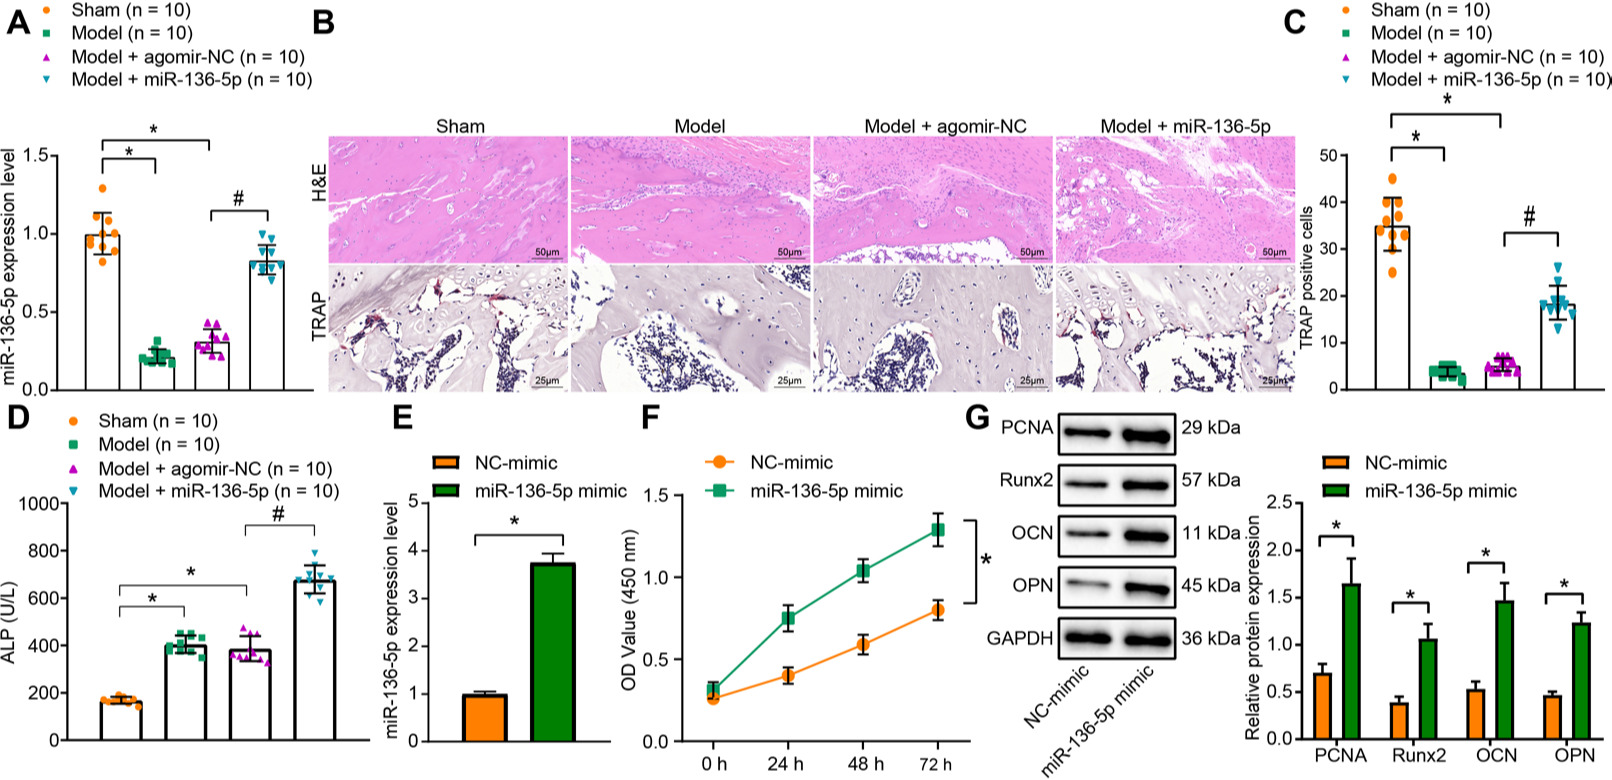 Fig. 1 
            miR-136-5p overexpression promotes osteogenic differentiation in vivo and in vitro. a) Reverse transcription quantitative polymerase chain reaction (RT-qPCR) detection of the expression of miR-136-5p in callus tissues of mice in each group; b) haematoxylin & eosin (HE) staining (× 200) and tartrate-resistant acid phosphatase (TRAP) staining (× 400) of bone healing situation of mice in each group; c) quantitative TRAP analysis of the number of positively stained osteoclasts in mice in each group; d) the disodium phenyl phosphate microplate method detection of the activity of alkaline phosphatase (ALP) in serum of mice in each group; e) RT-qPCR detection of the expression of microRNA (miR)-136-5p in MC3T3-E1 cells overexpressing miR-136-5p; f) Cell counting kit (CCK)-8 detection of the proliferation rate of MC3T3-E1 cells overexpressing miR-136-5p; g) Western blot detection of the protein expression of proliferating cell nuclear antigen (PCNA), Runt-related transcription factor 2 (Runx2), osteocalcin (OCN), osteopontin (OPN), and glyceraldehyde-3-phosphate dehydrogenase (GAPDH) in MC3T3-E1 cells overexpressing miR-136-5p. * indicates p < 0.05 compared with sham group or NC -mimic group and # indicates p < 0.05 compared with Model + agomir-NC. Measurement data were presented as mean and standard deviation. Unpaired t-test was used for data comparison between two groups. Data comparisons among multiple groups were performed using one-way analysis of variance (ANOVA) with Tukey’s post hoc test. Data comparison among groups at different timepoints was performed by repeated measures ANOVA with Bonferroni’s post hoc test. N = 10. The experiment was repeated three times.
          